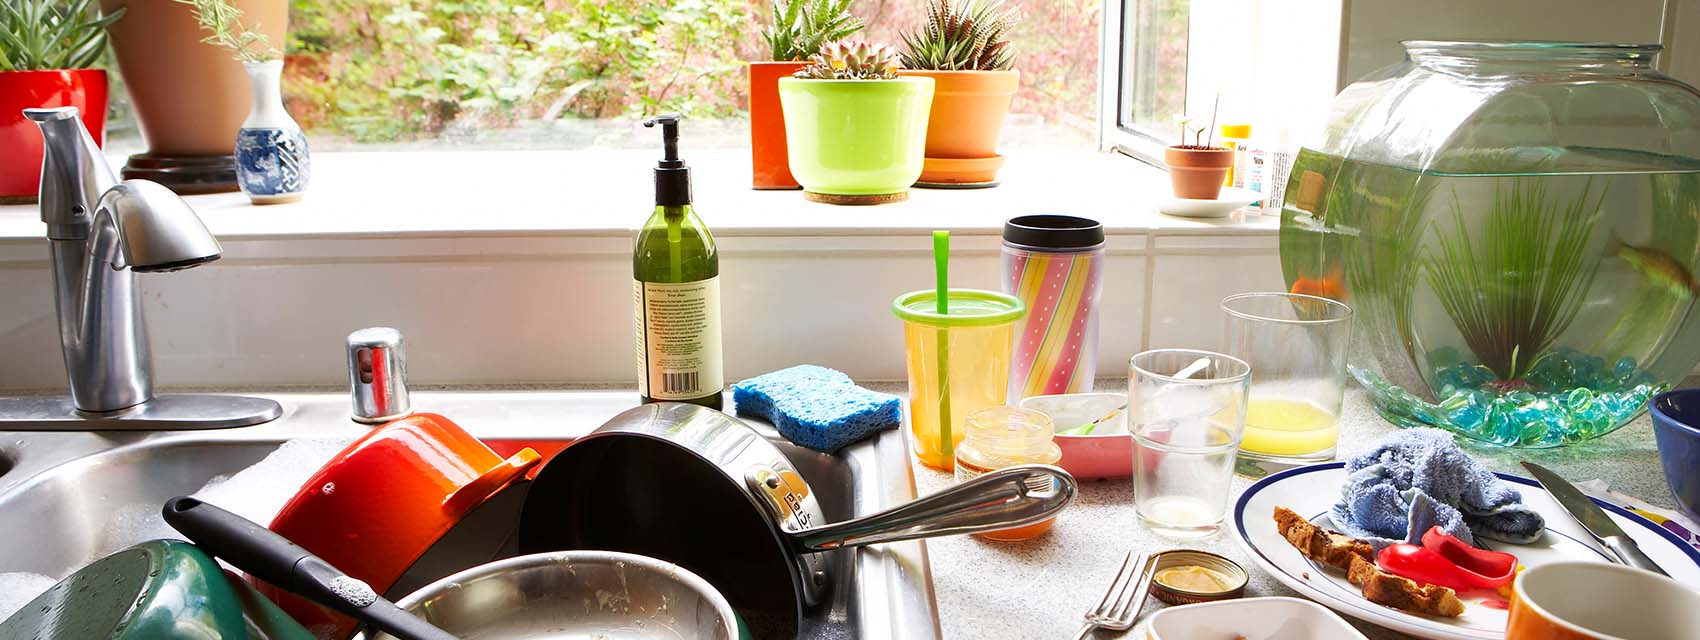 Dirty dishes piled in kitchen sink